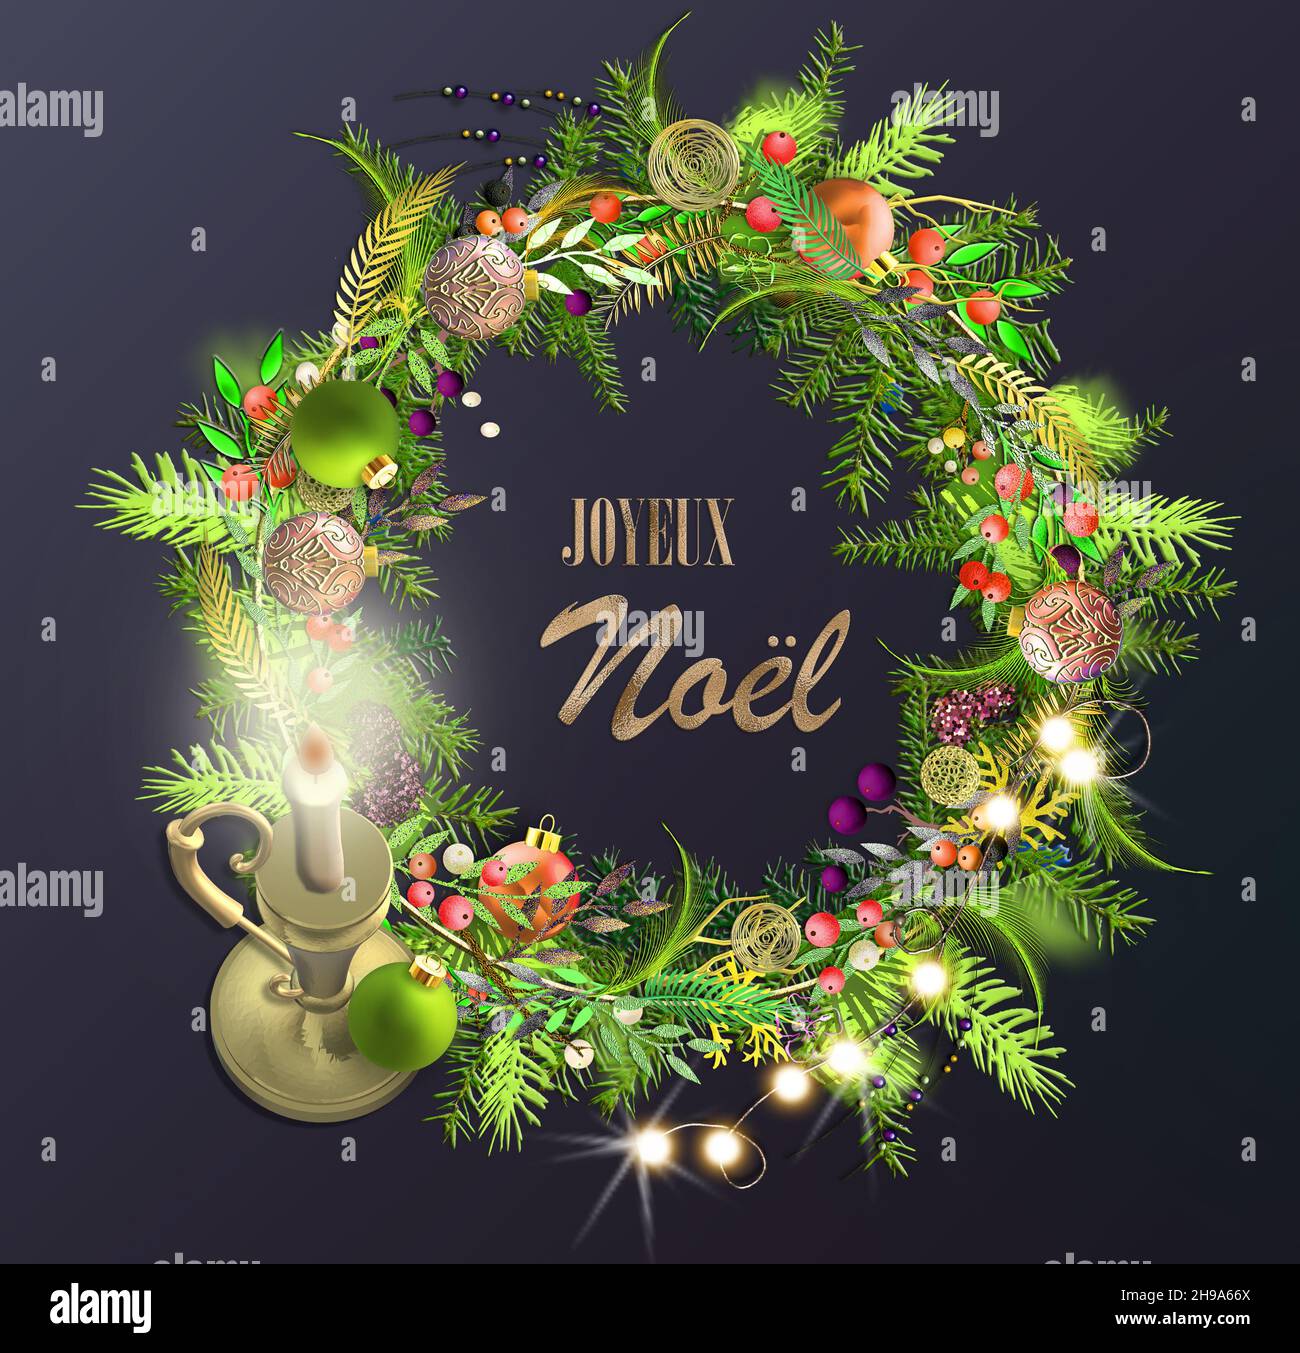 French Joyeux Noel English translation Merry Christmas. Xmas greeting card  French golden text, Bright wreath with baubles, festive decoration pine  branches over dark blue. 3D illustration Stock Photo - Alamy